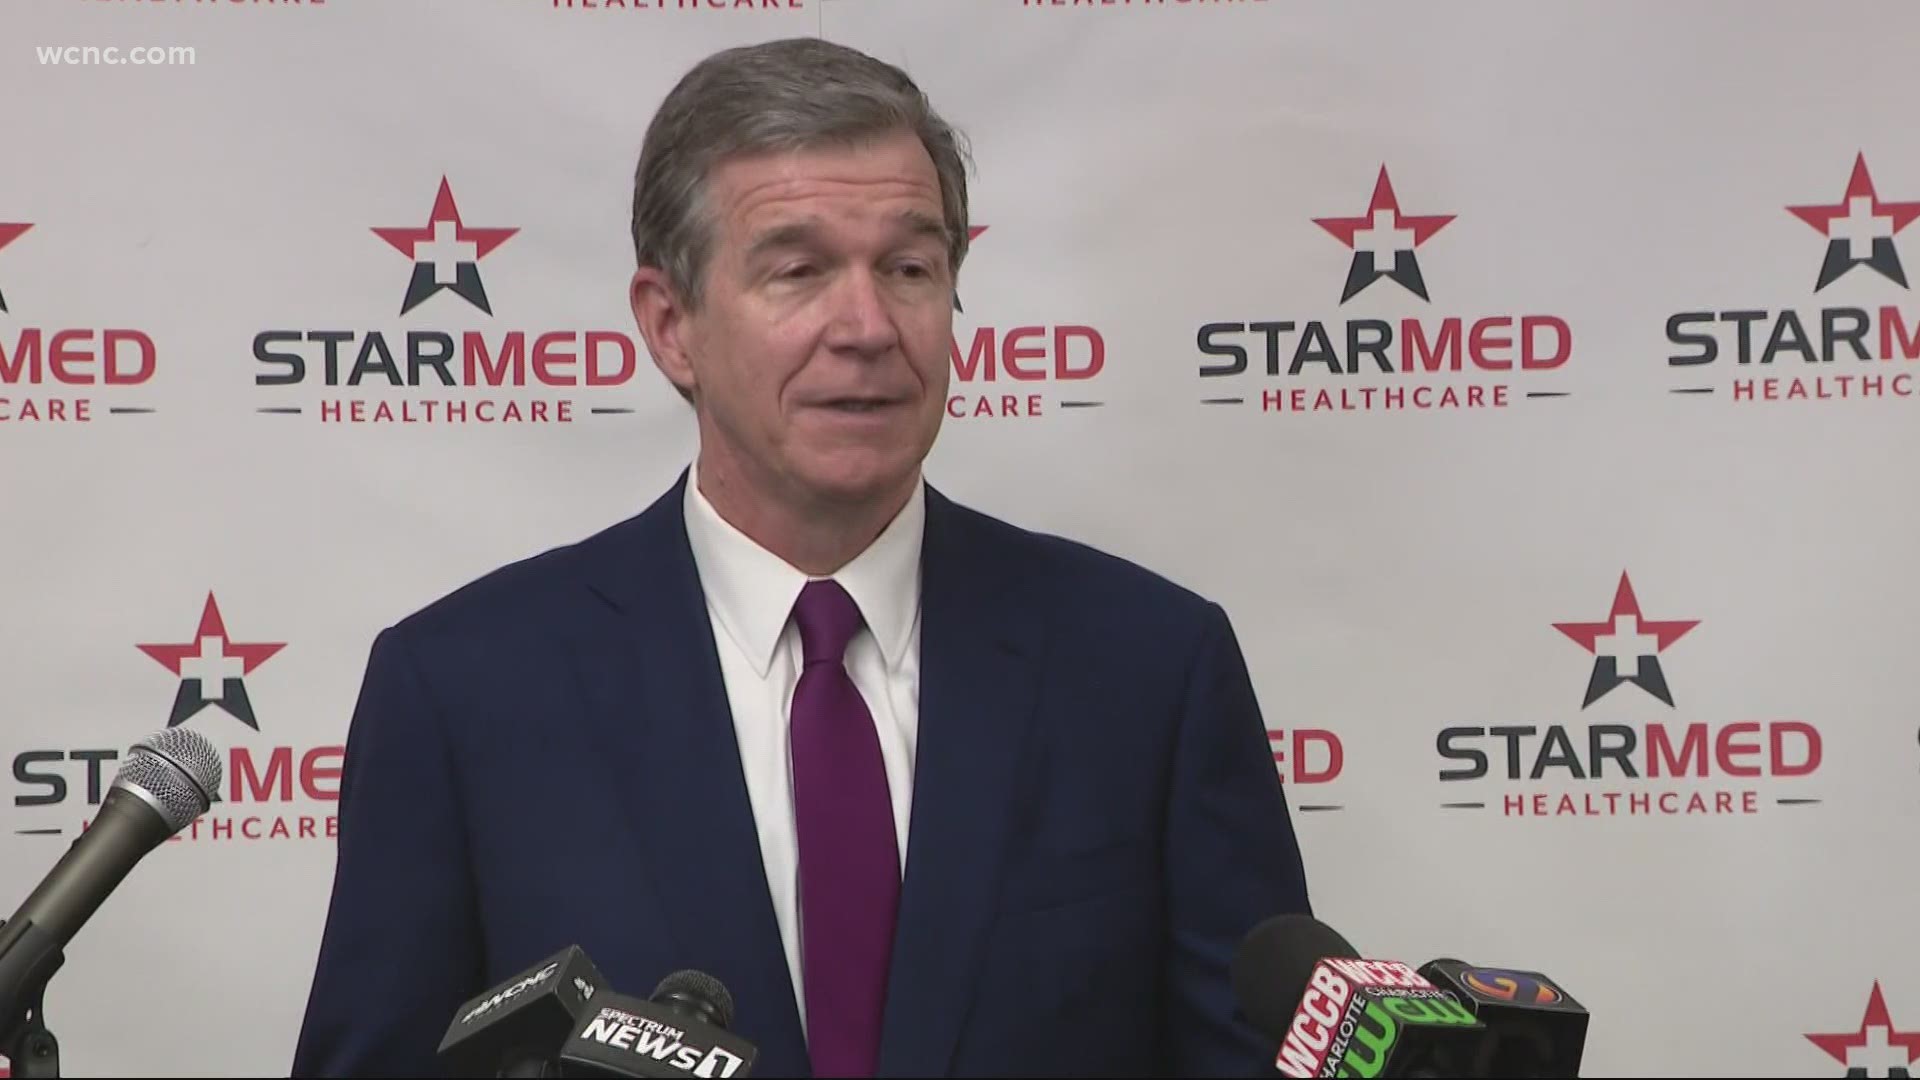 Gov. Roy Cooper said North Carolina is considering larger prizes to encourage folks to get the COVID-19 vaccine. Currently, the state is giving out $25 cash cards.